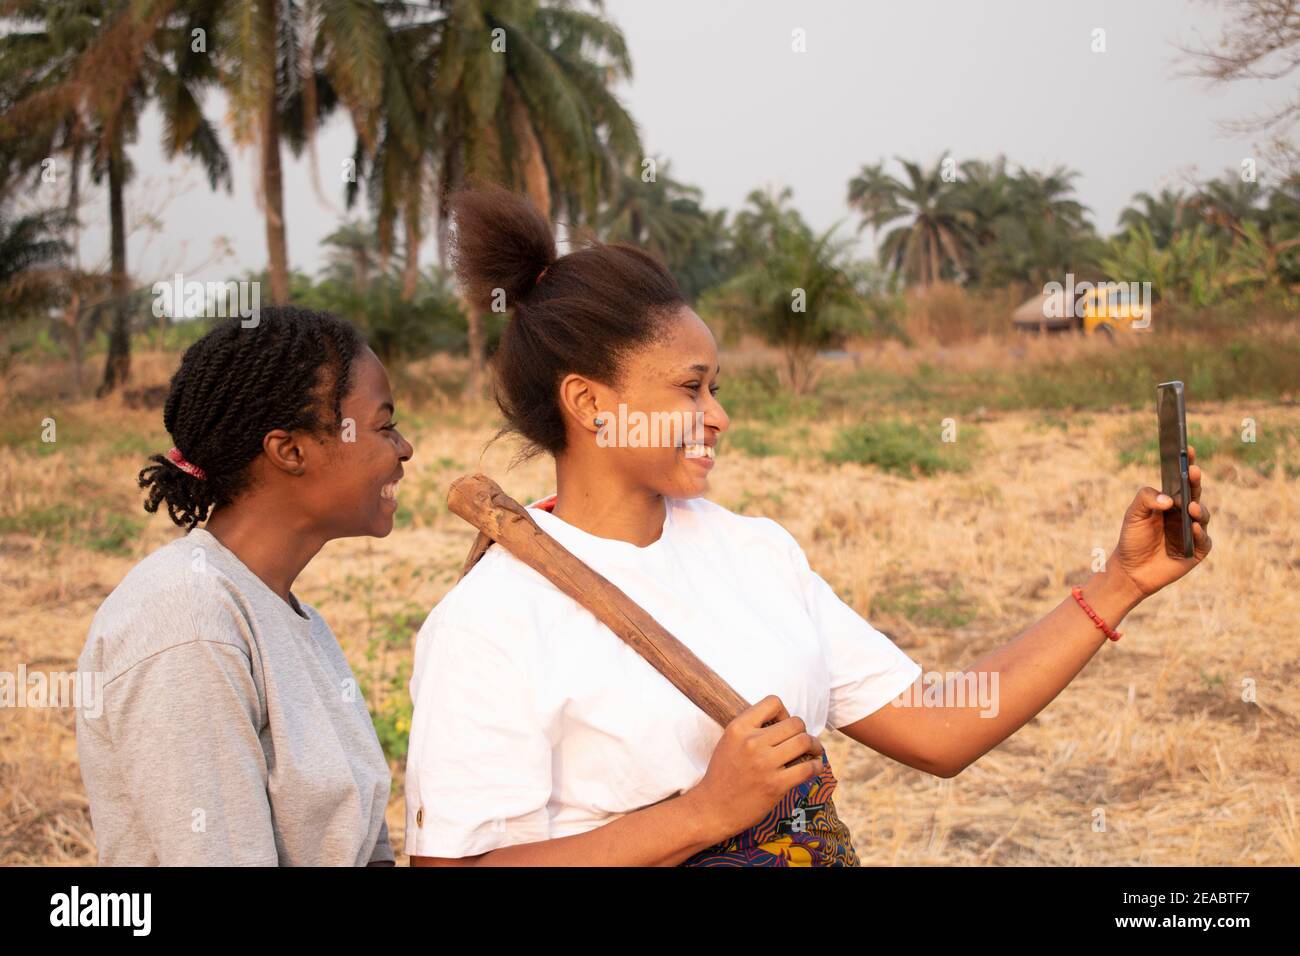 side view of two women at a farmland Stock Photo